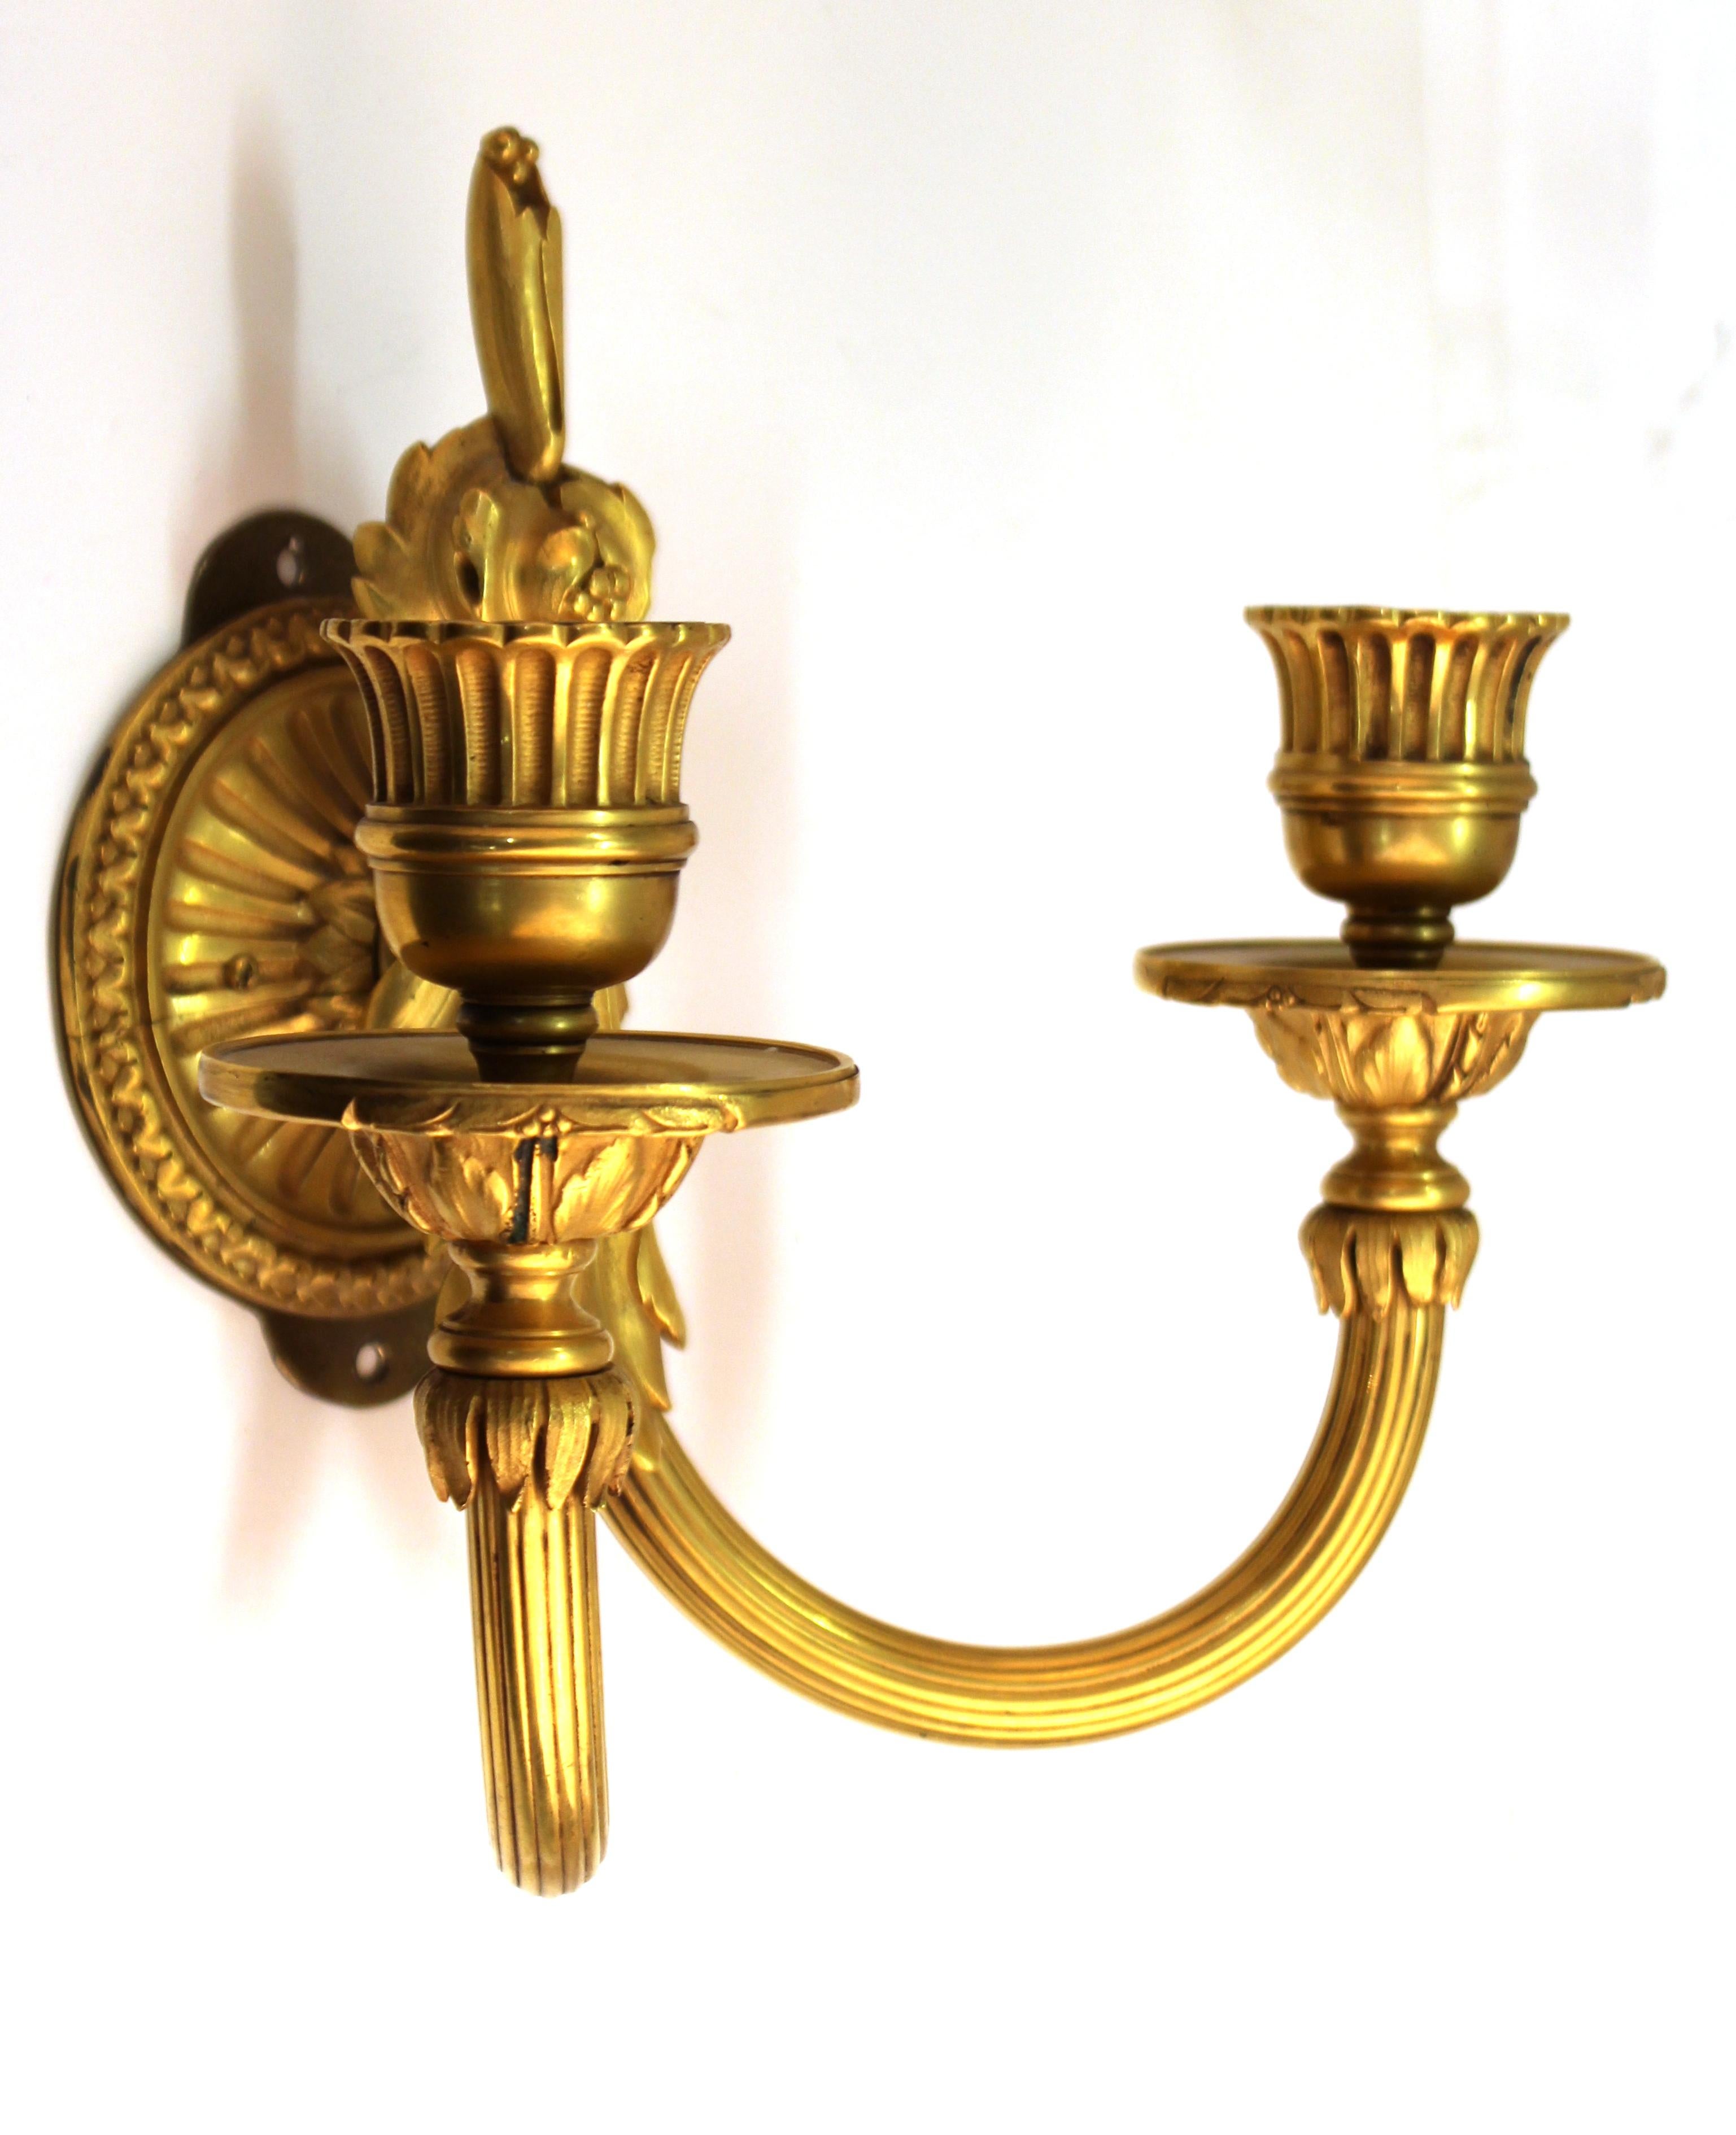 20th Century Louis XVI Style Gilt Bronze Wall Candle Sconces